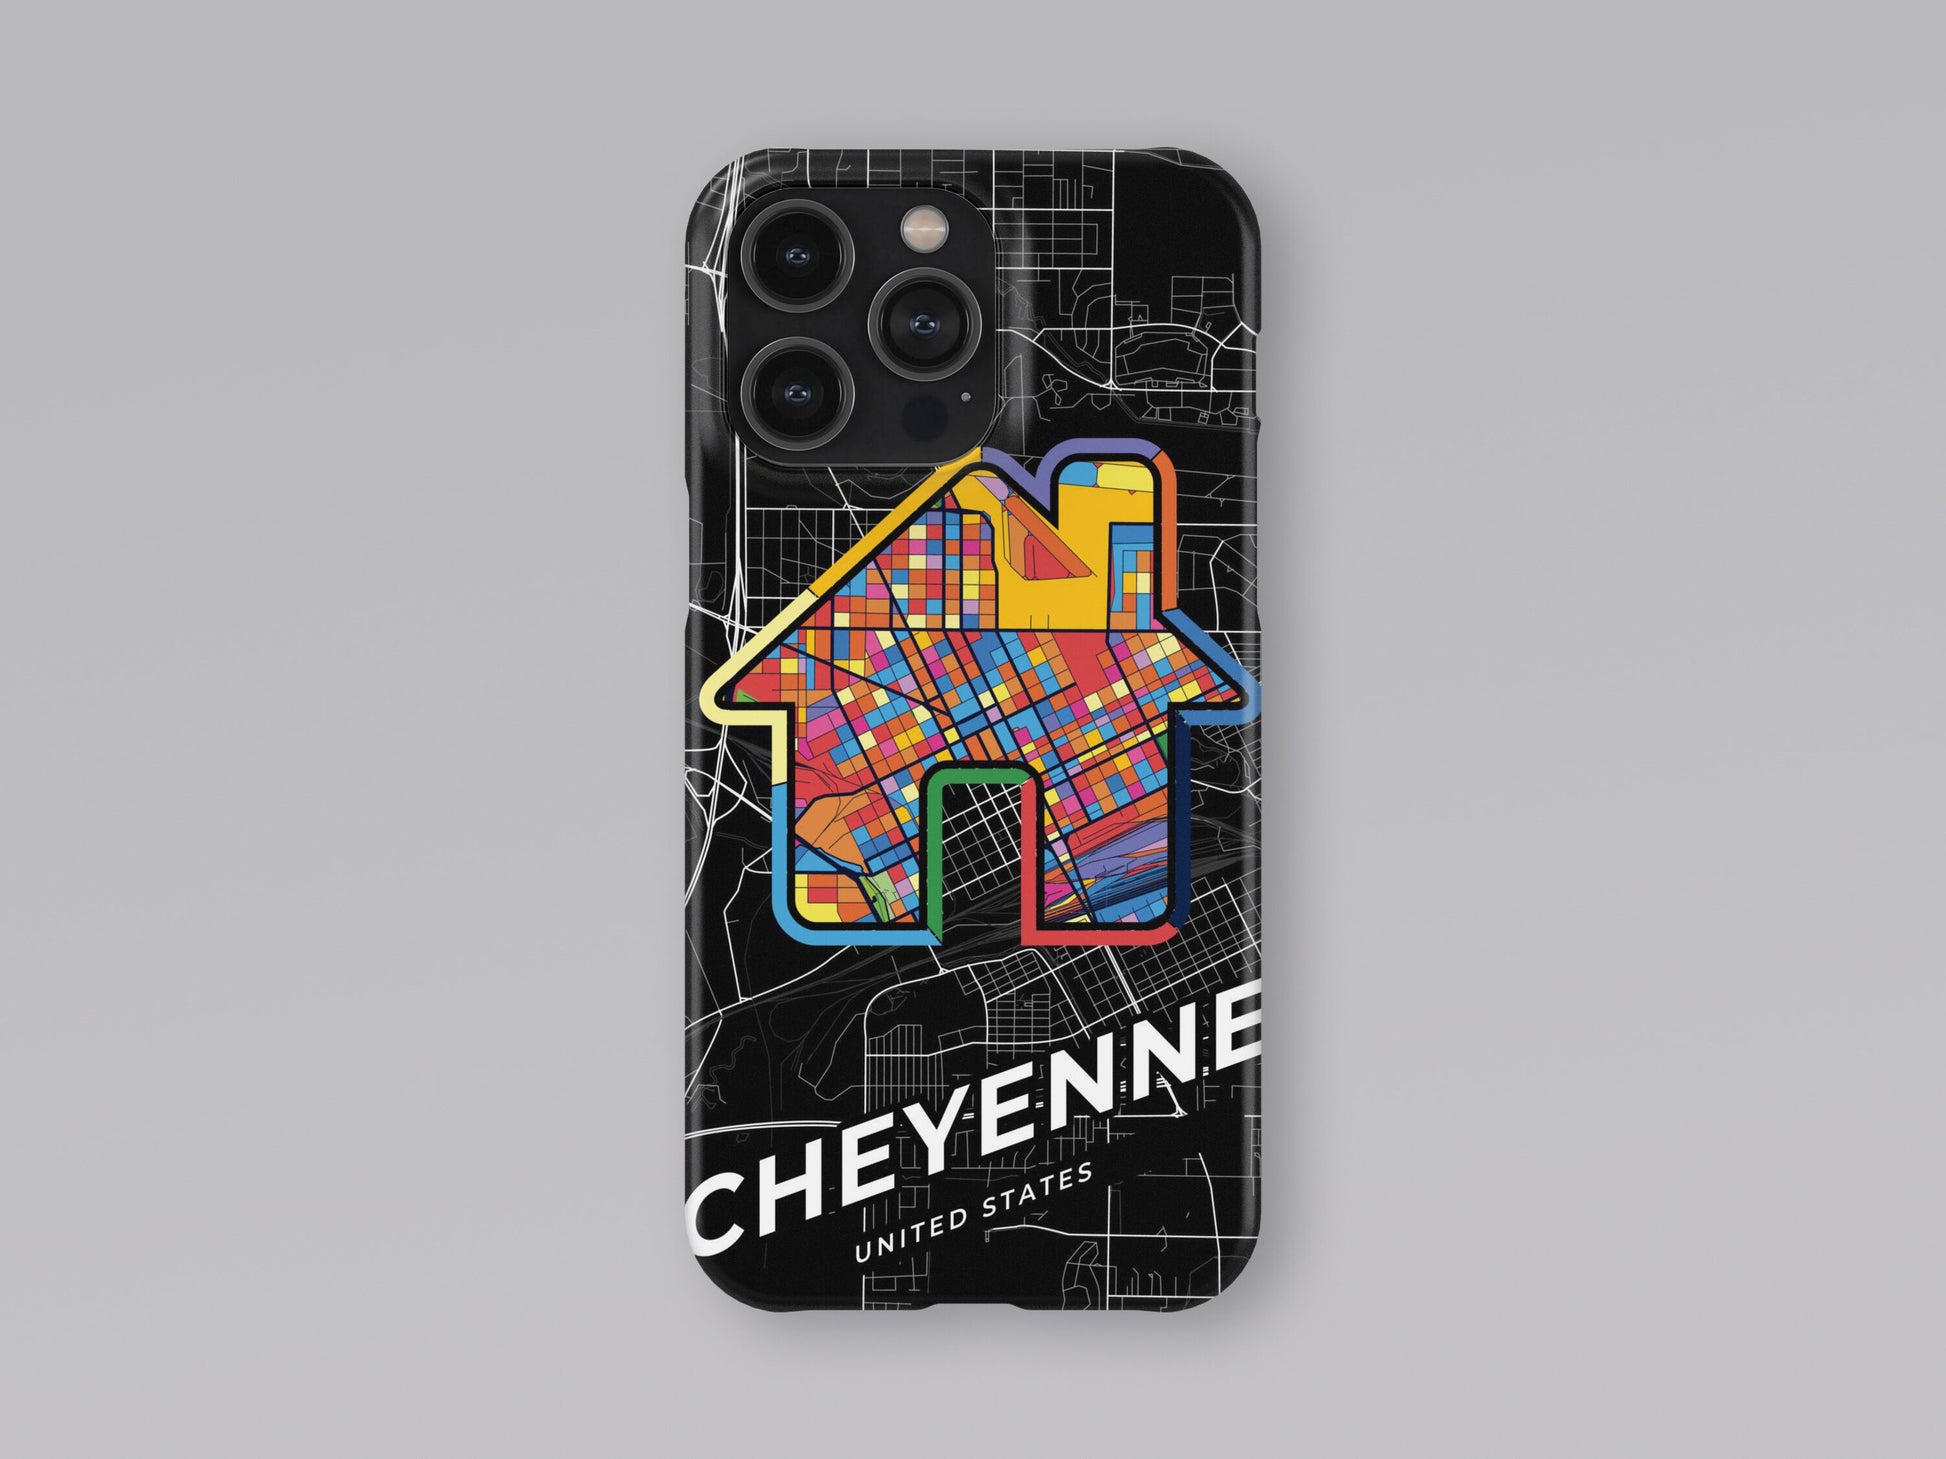 Cheyenne Wyoming slim phone case with colorful icon. Birthday, wedding or housewarming gift. Couple match cases. 3